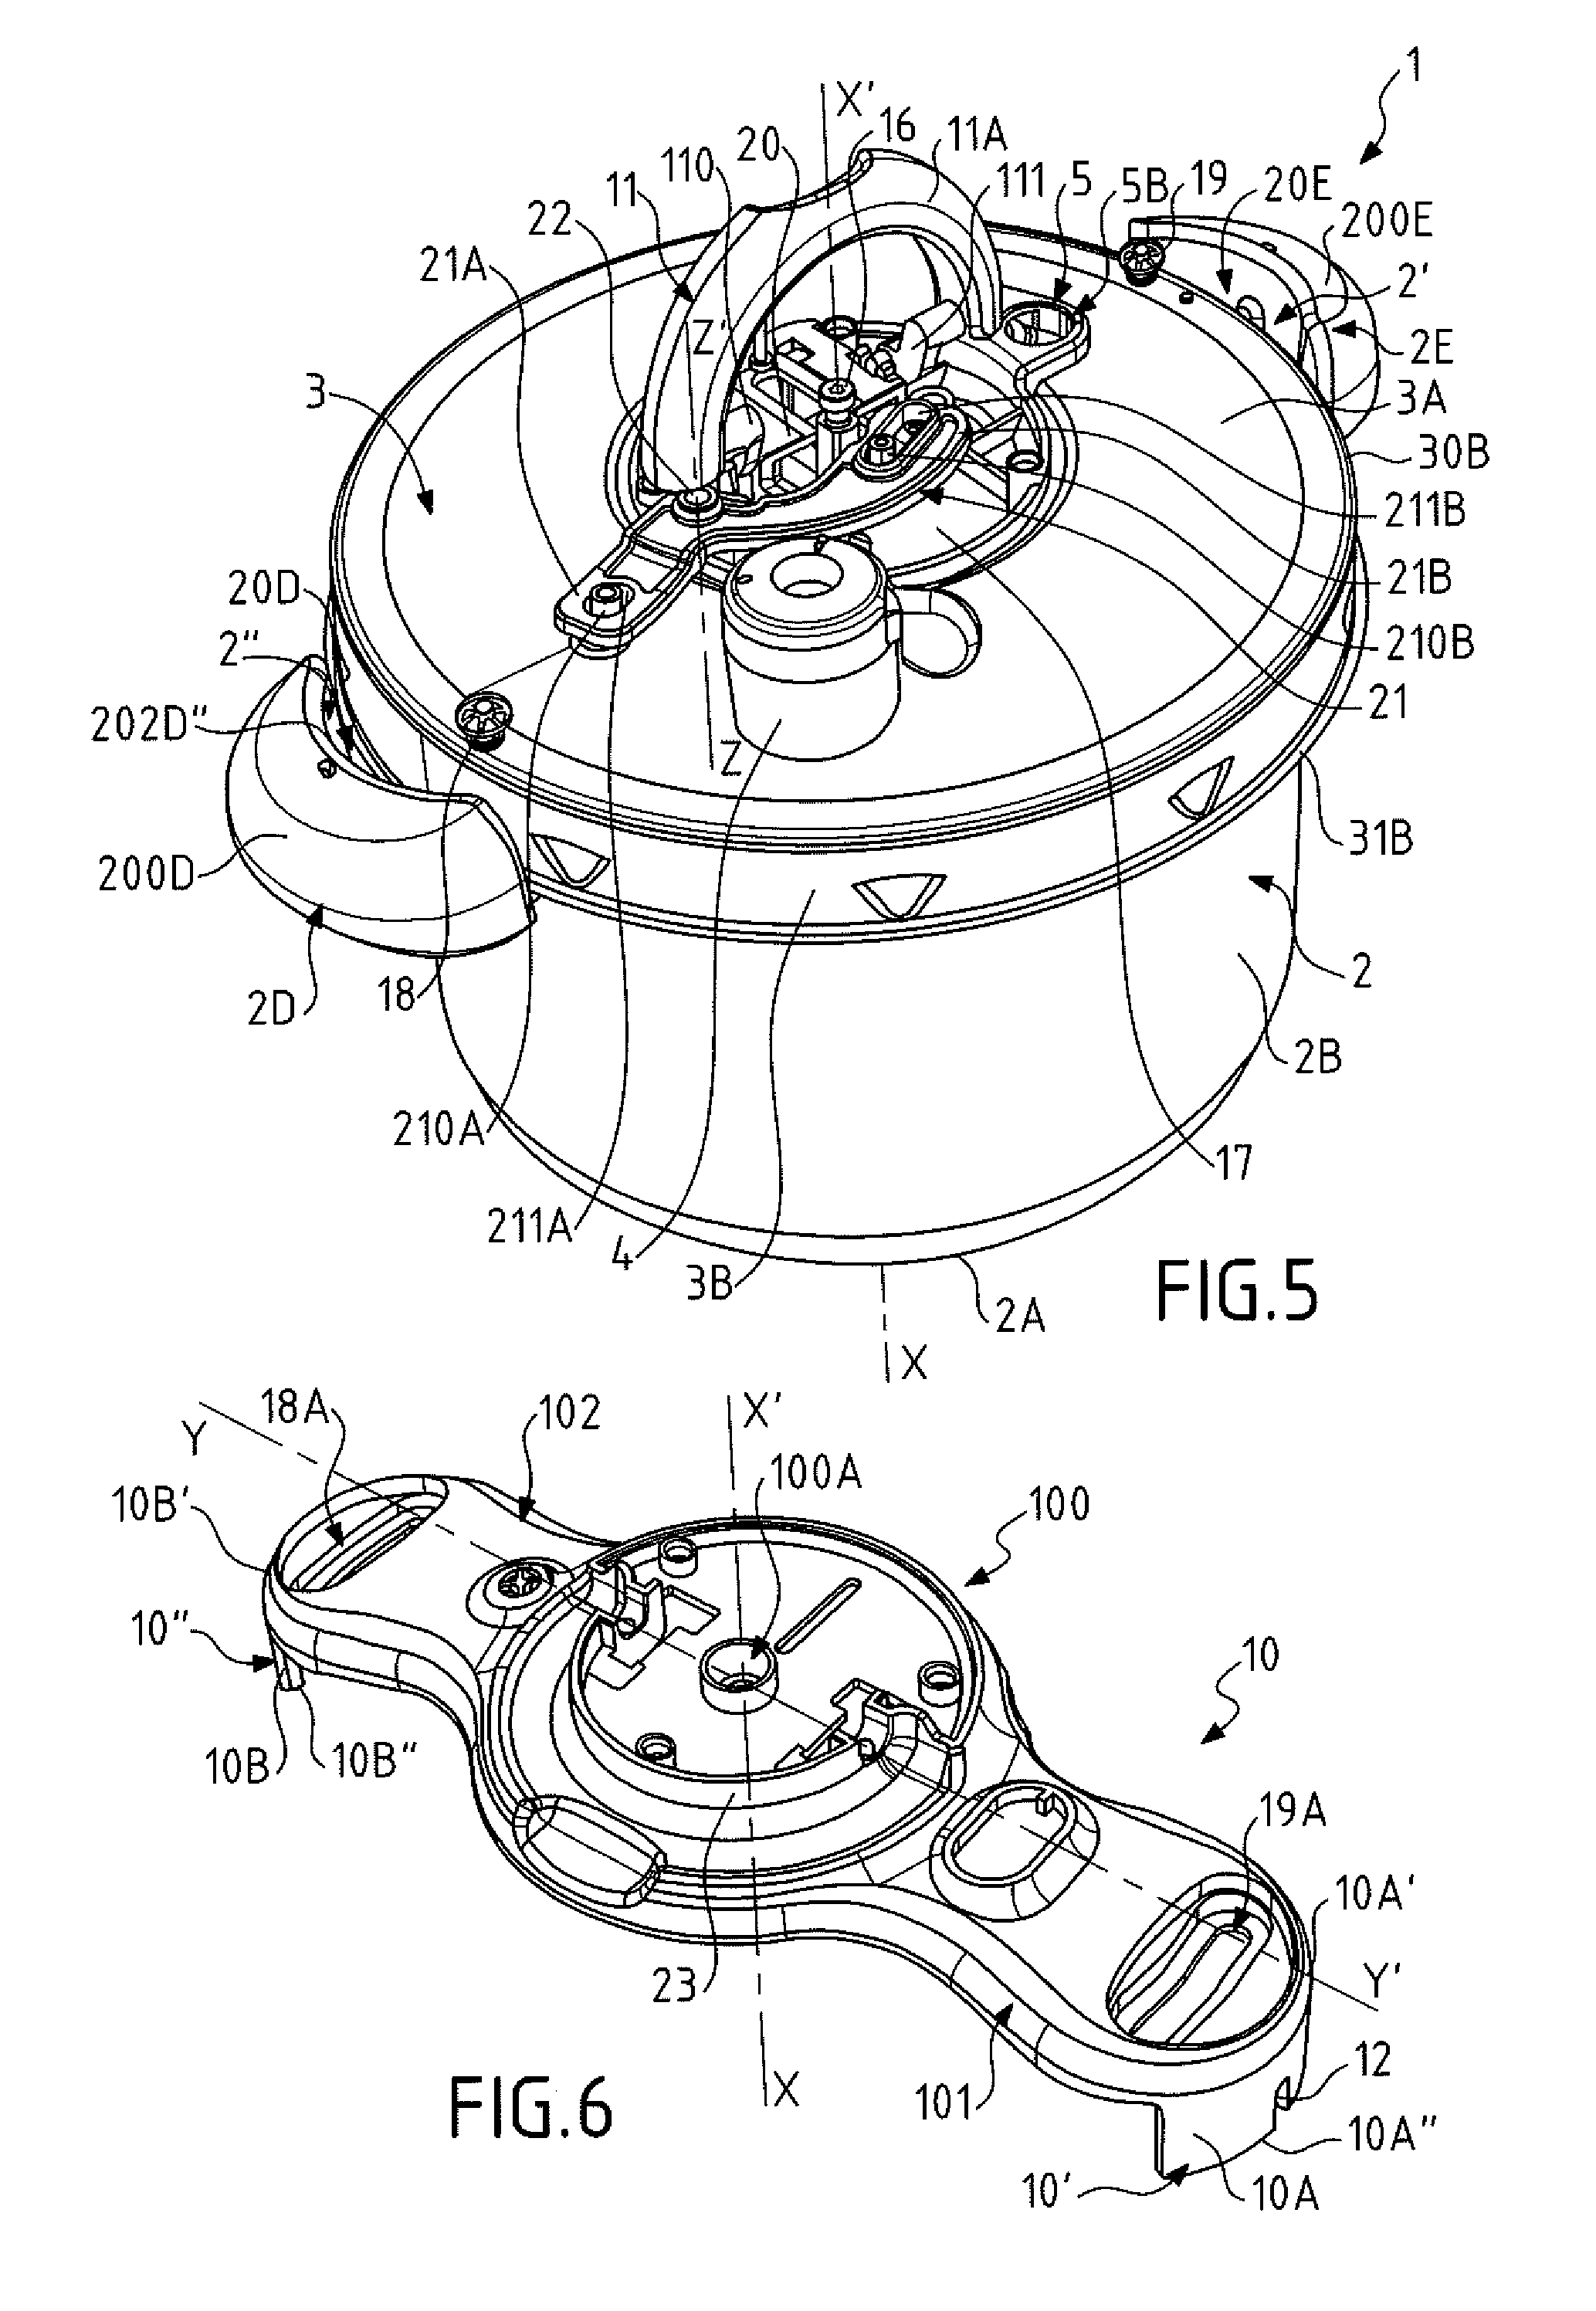 Bayonet fitting pressure cooker provided with guide elements